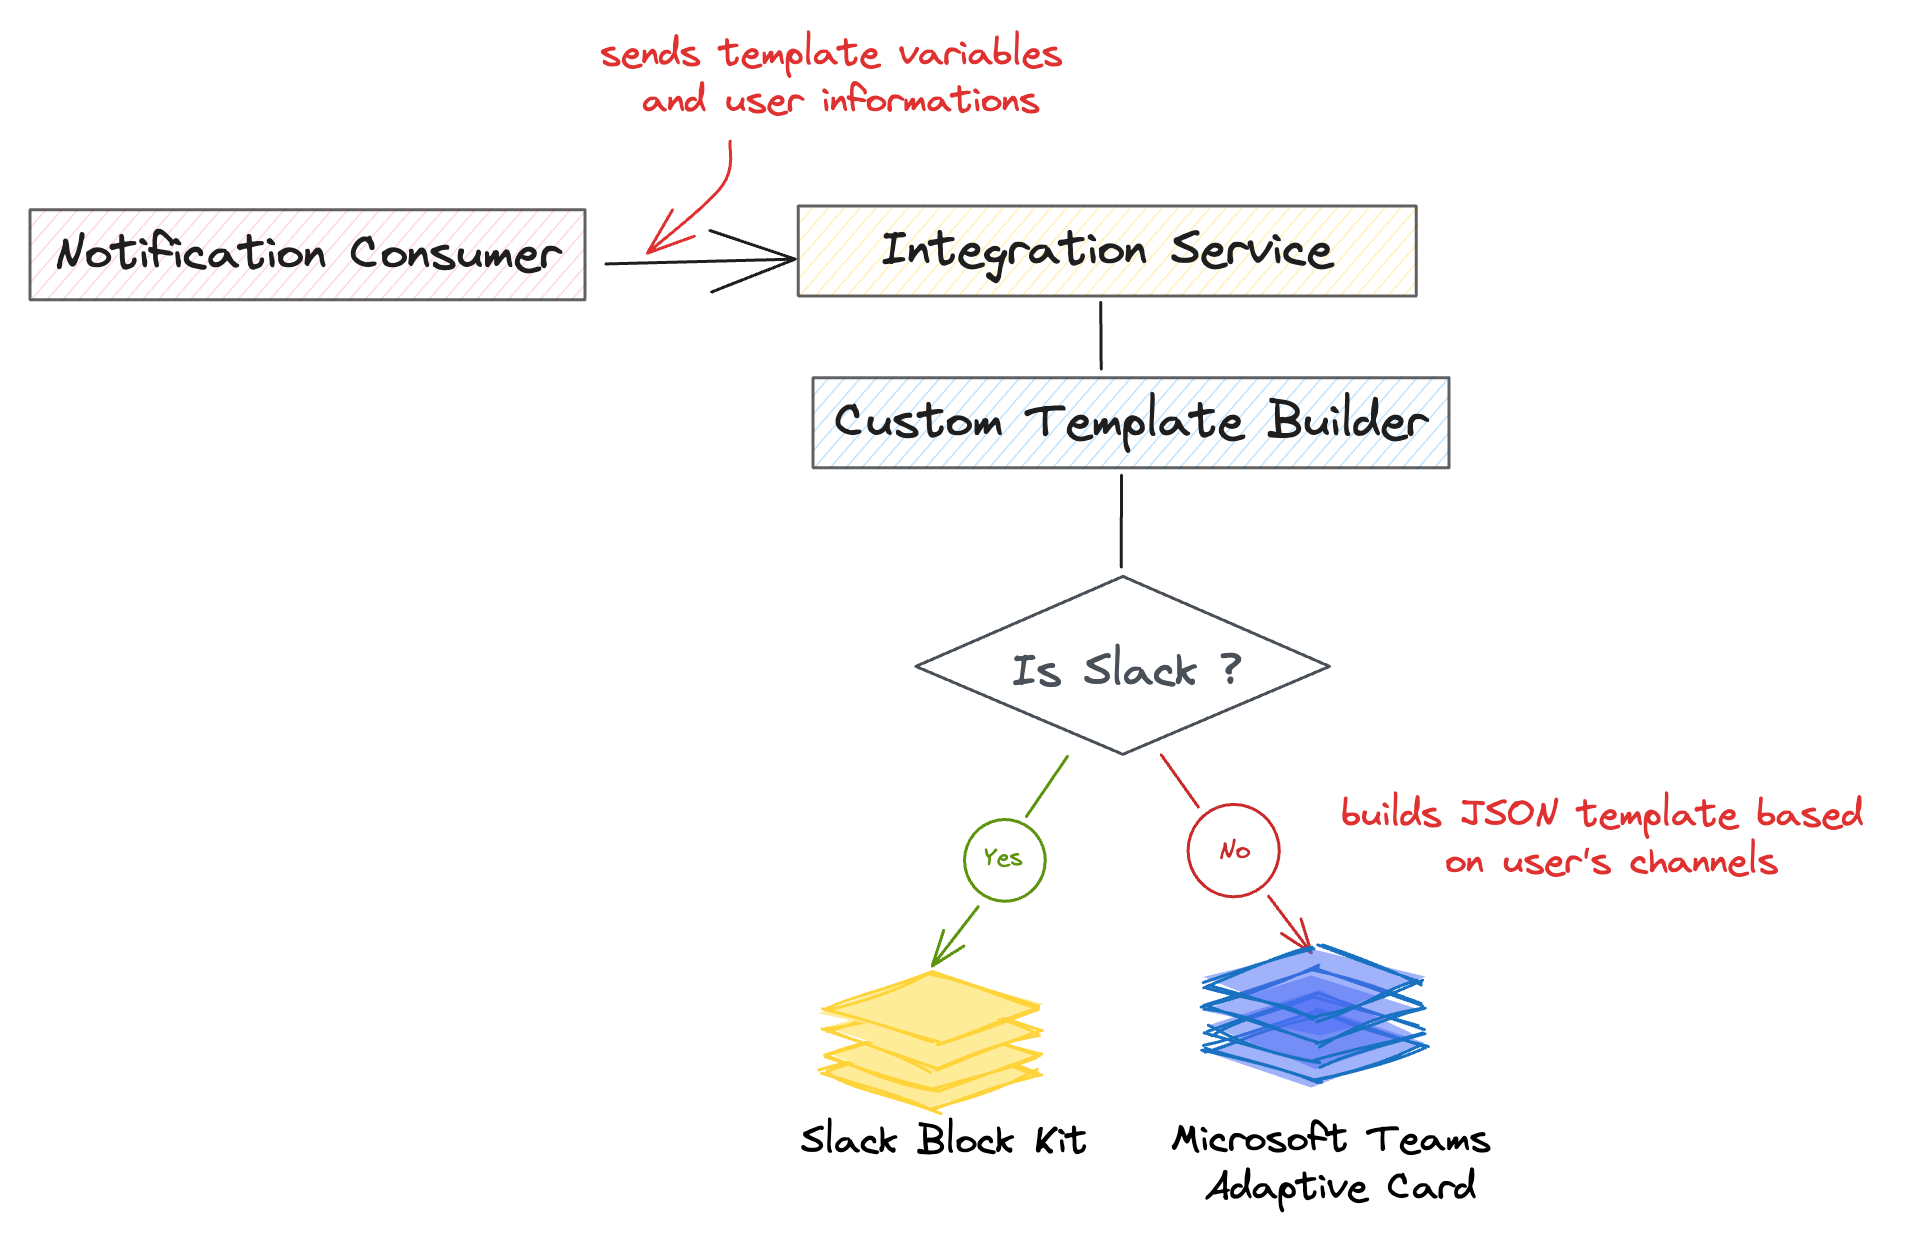 Simplified view of the Integration templating system